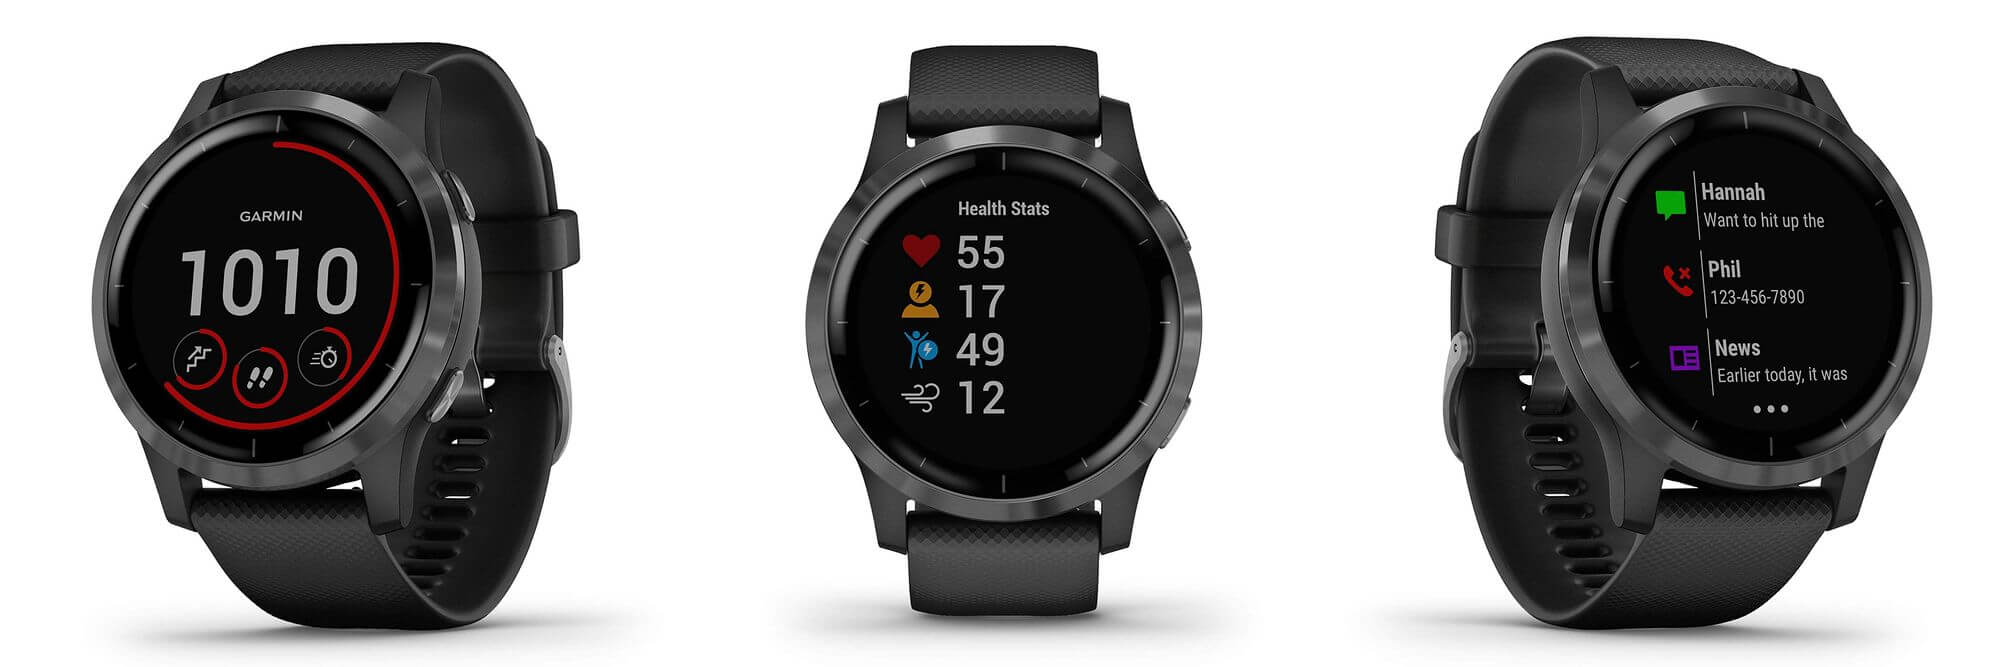 Garmin vivoactive 4 - Fitness smartwatch with sophisticated health 